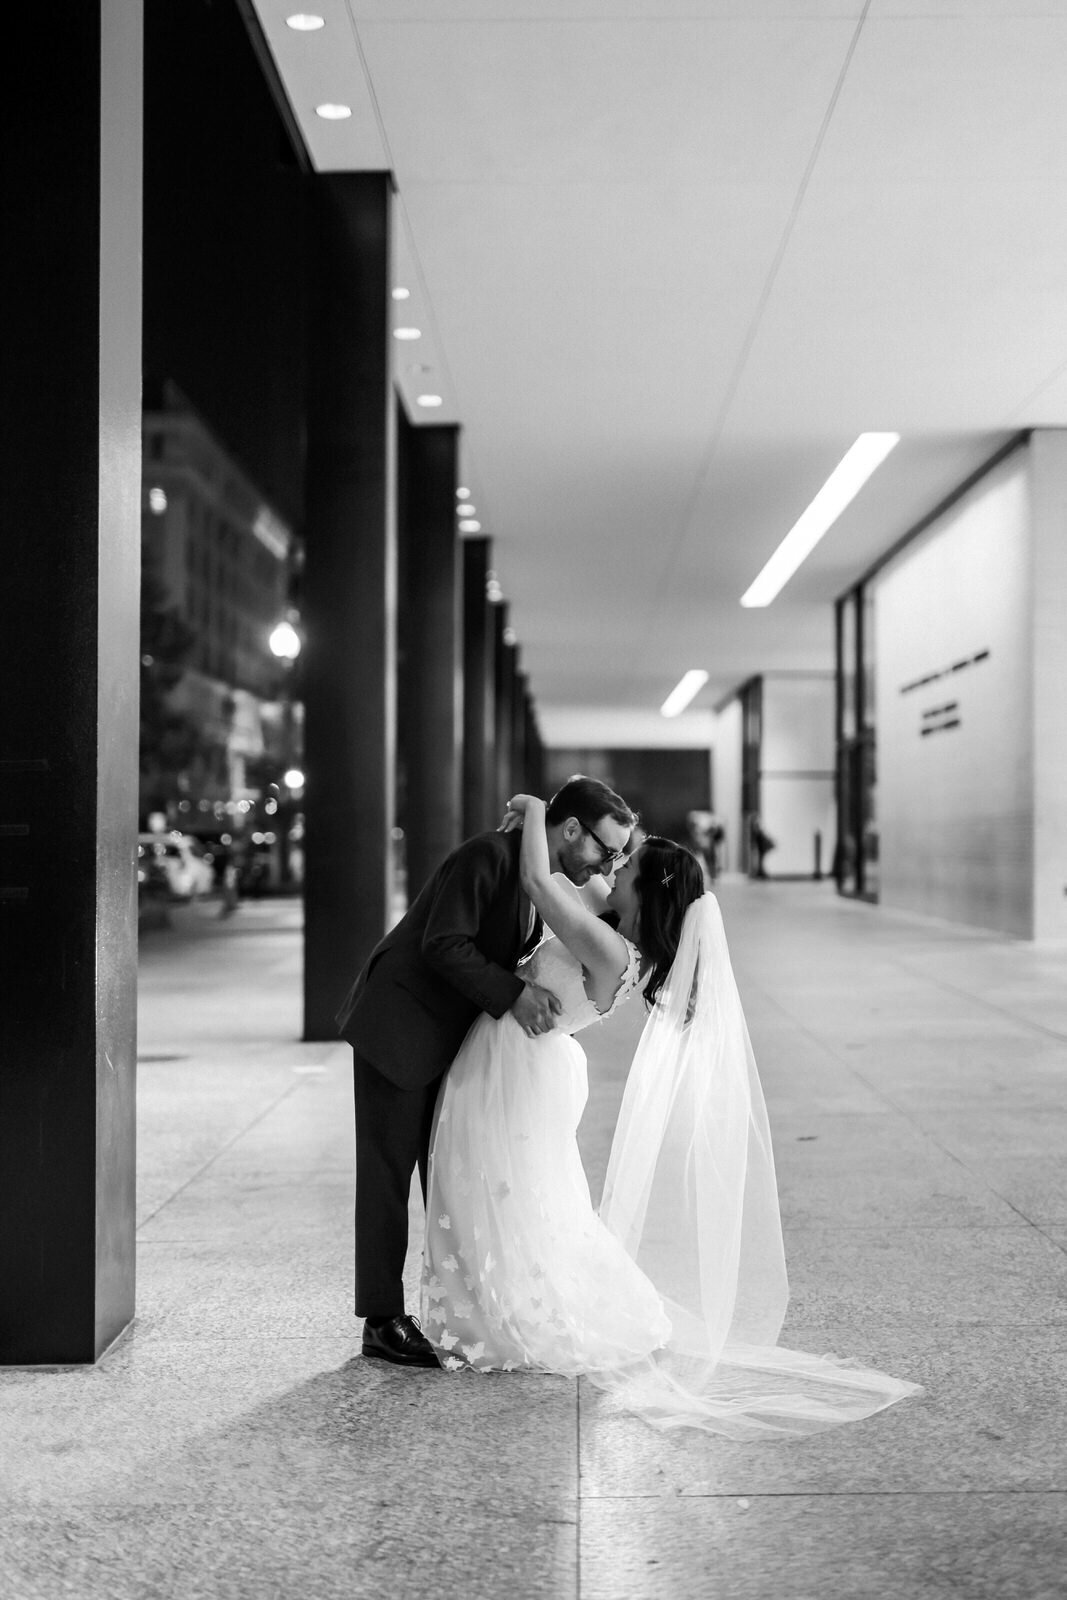 Creative Wedding Photography at The Riggs Hotel in Washington DC 37